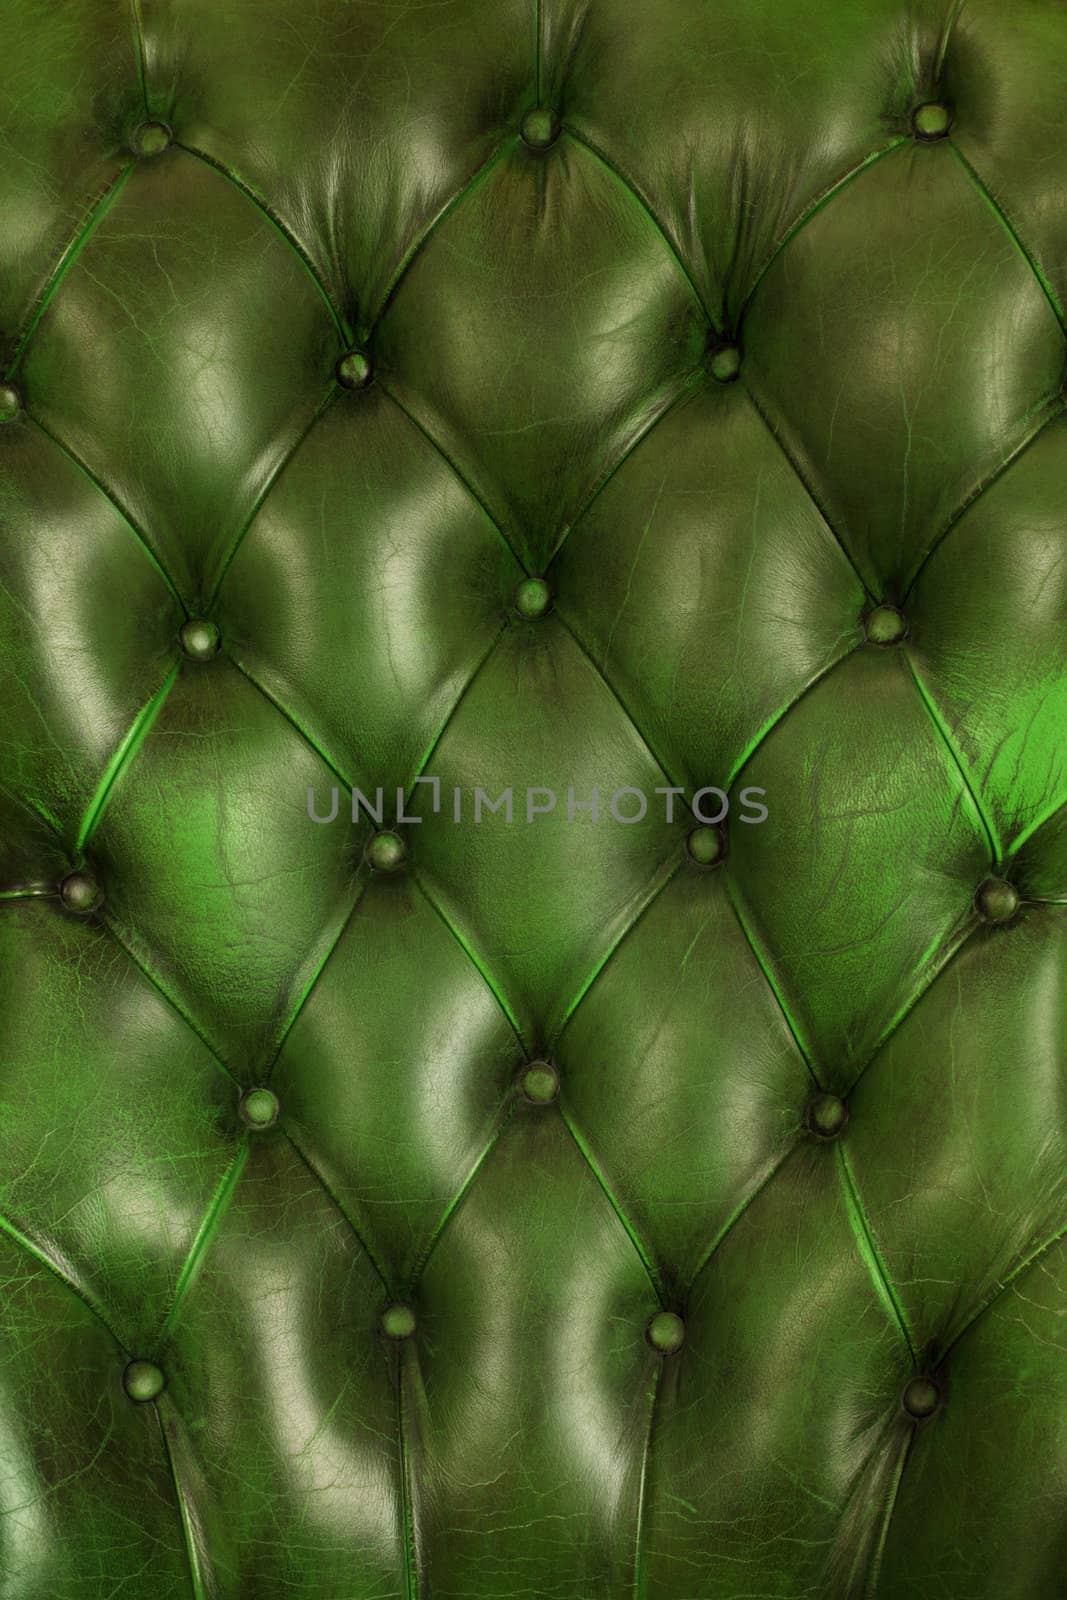 Photo of the old green leather upholstery of an antique chair.